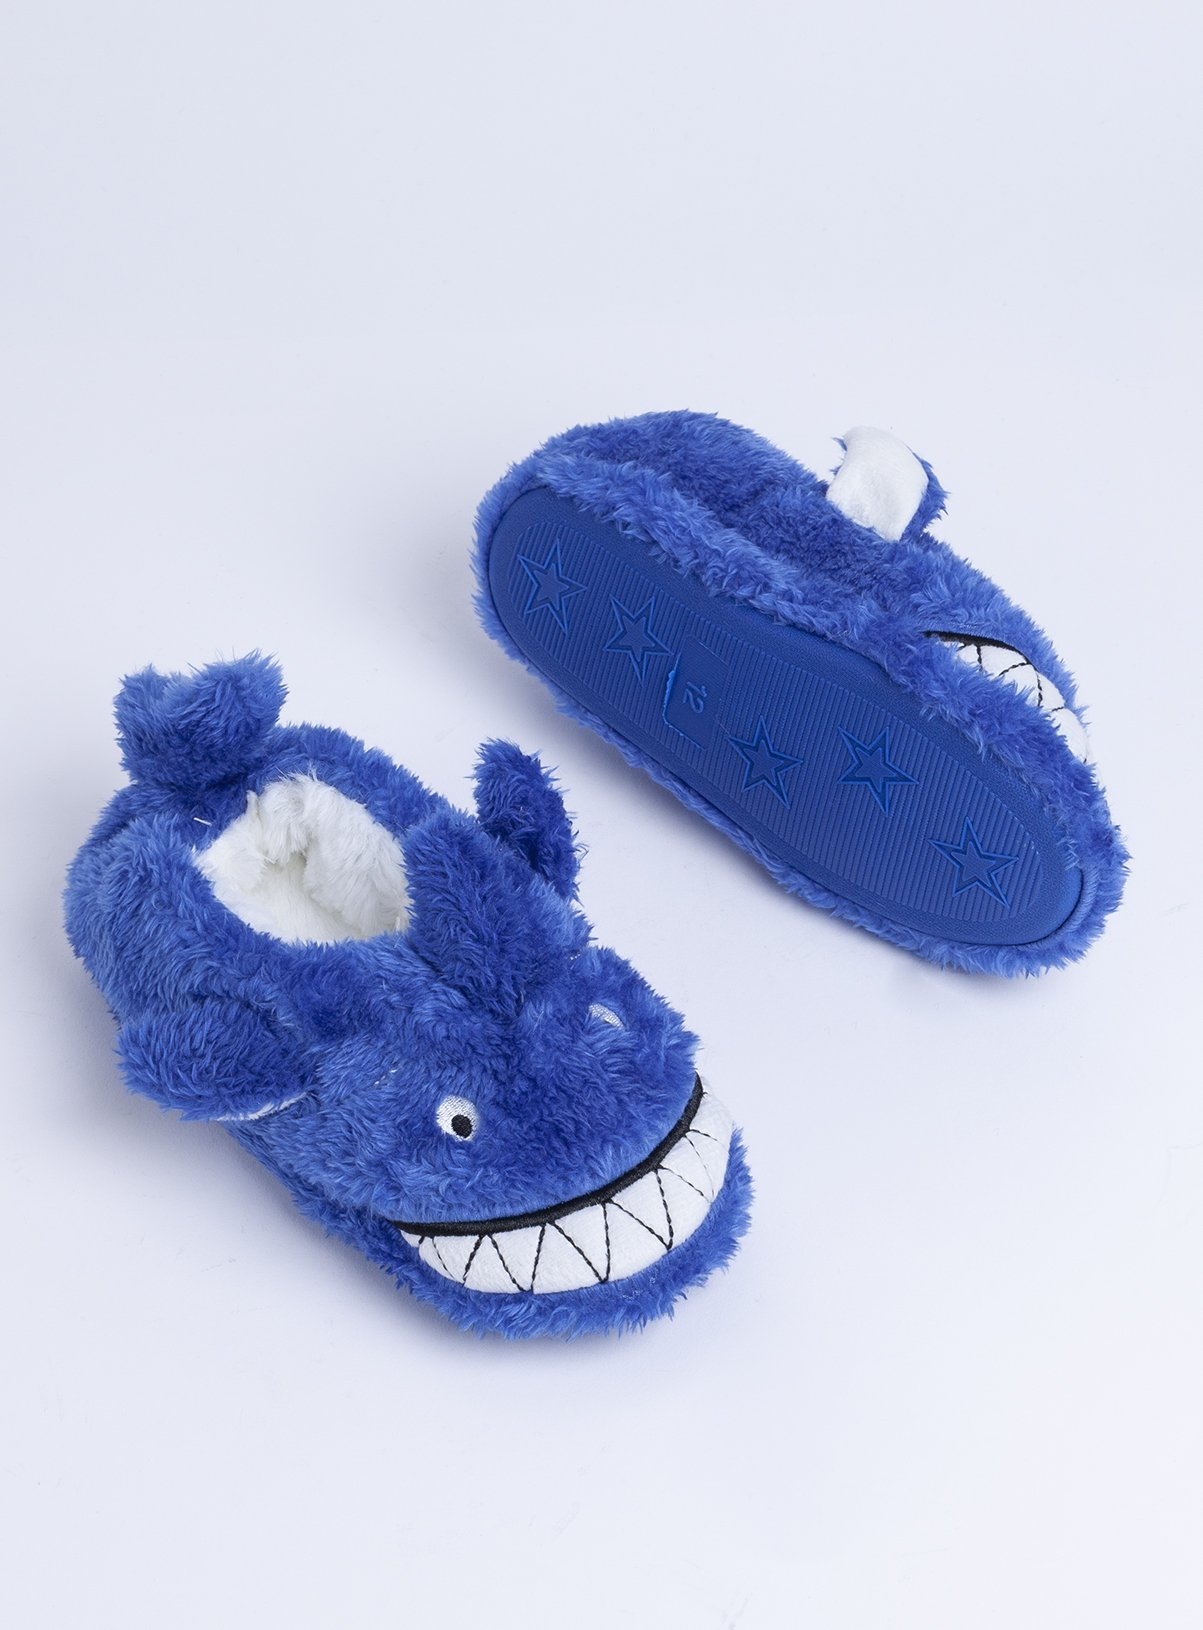 infant size 6 slippers